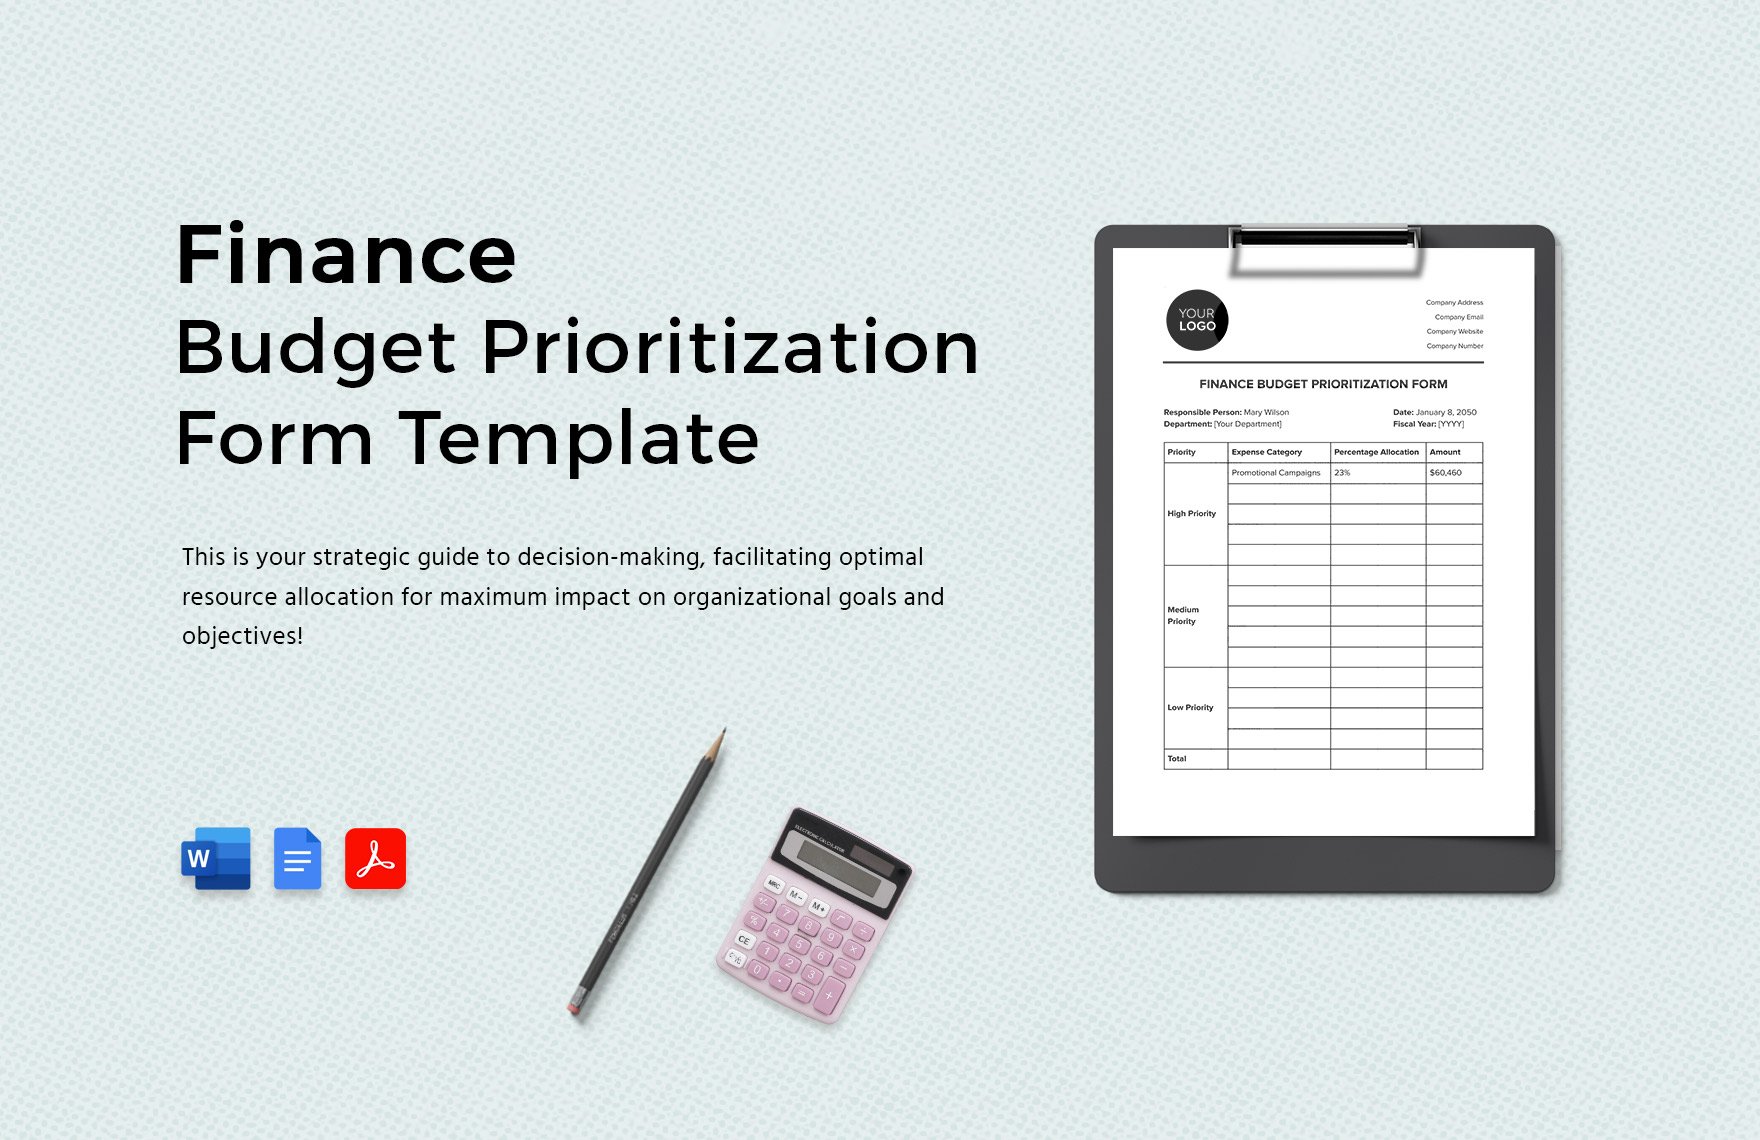 Finance Budget Prioritization Form Template